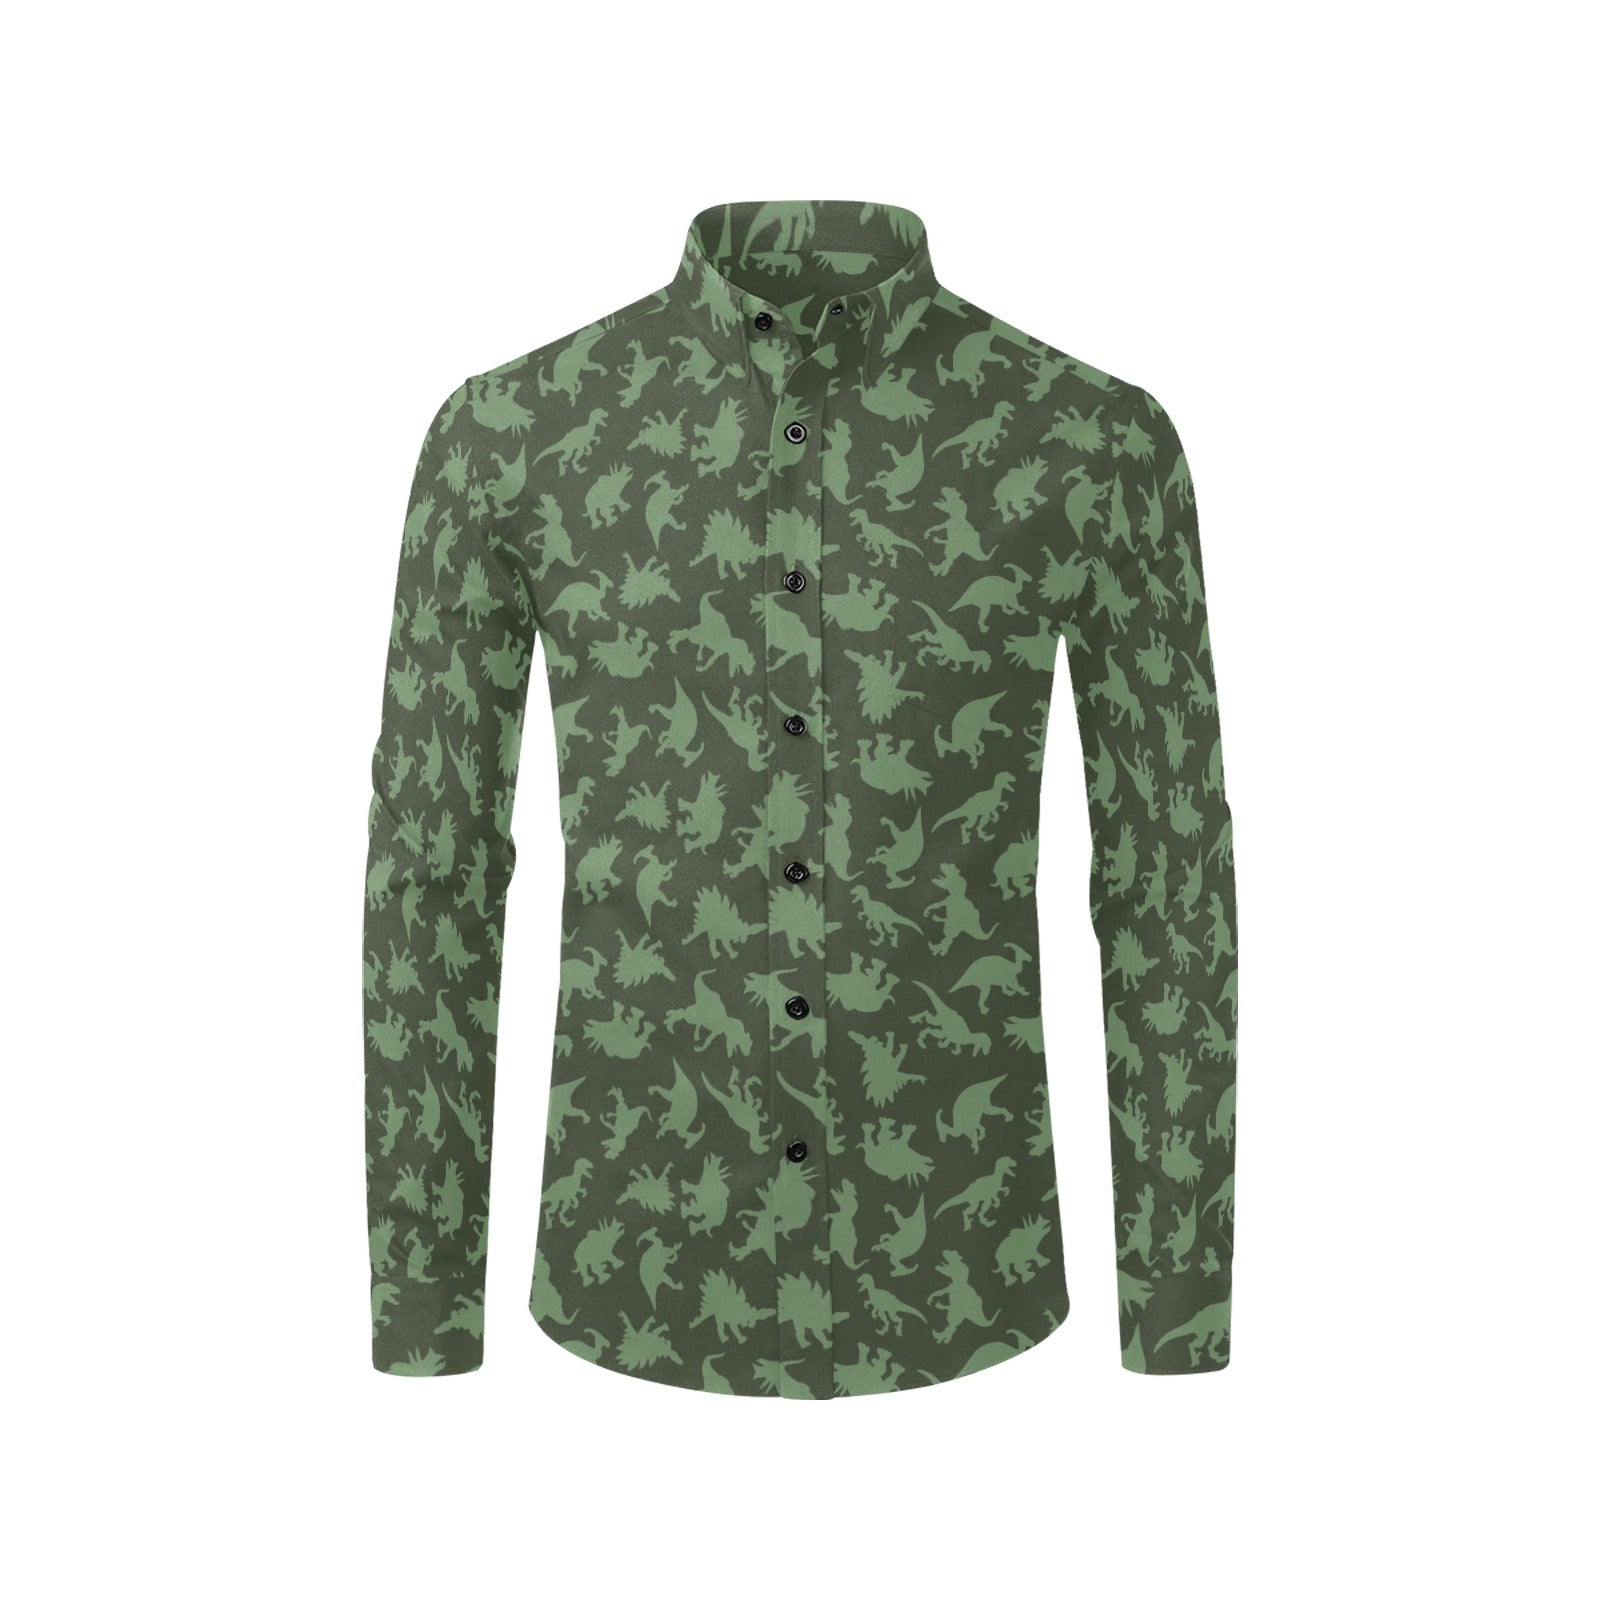 Dinosaurs Long Sleeve Men Button Up Shirt, Dino Green Print Buttoned Collar Casual Shirt with Chest Pocket Starcove Fashion